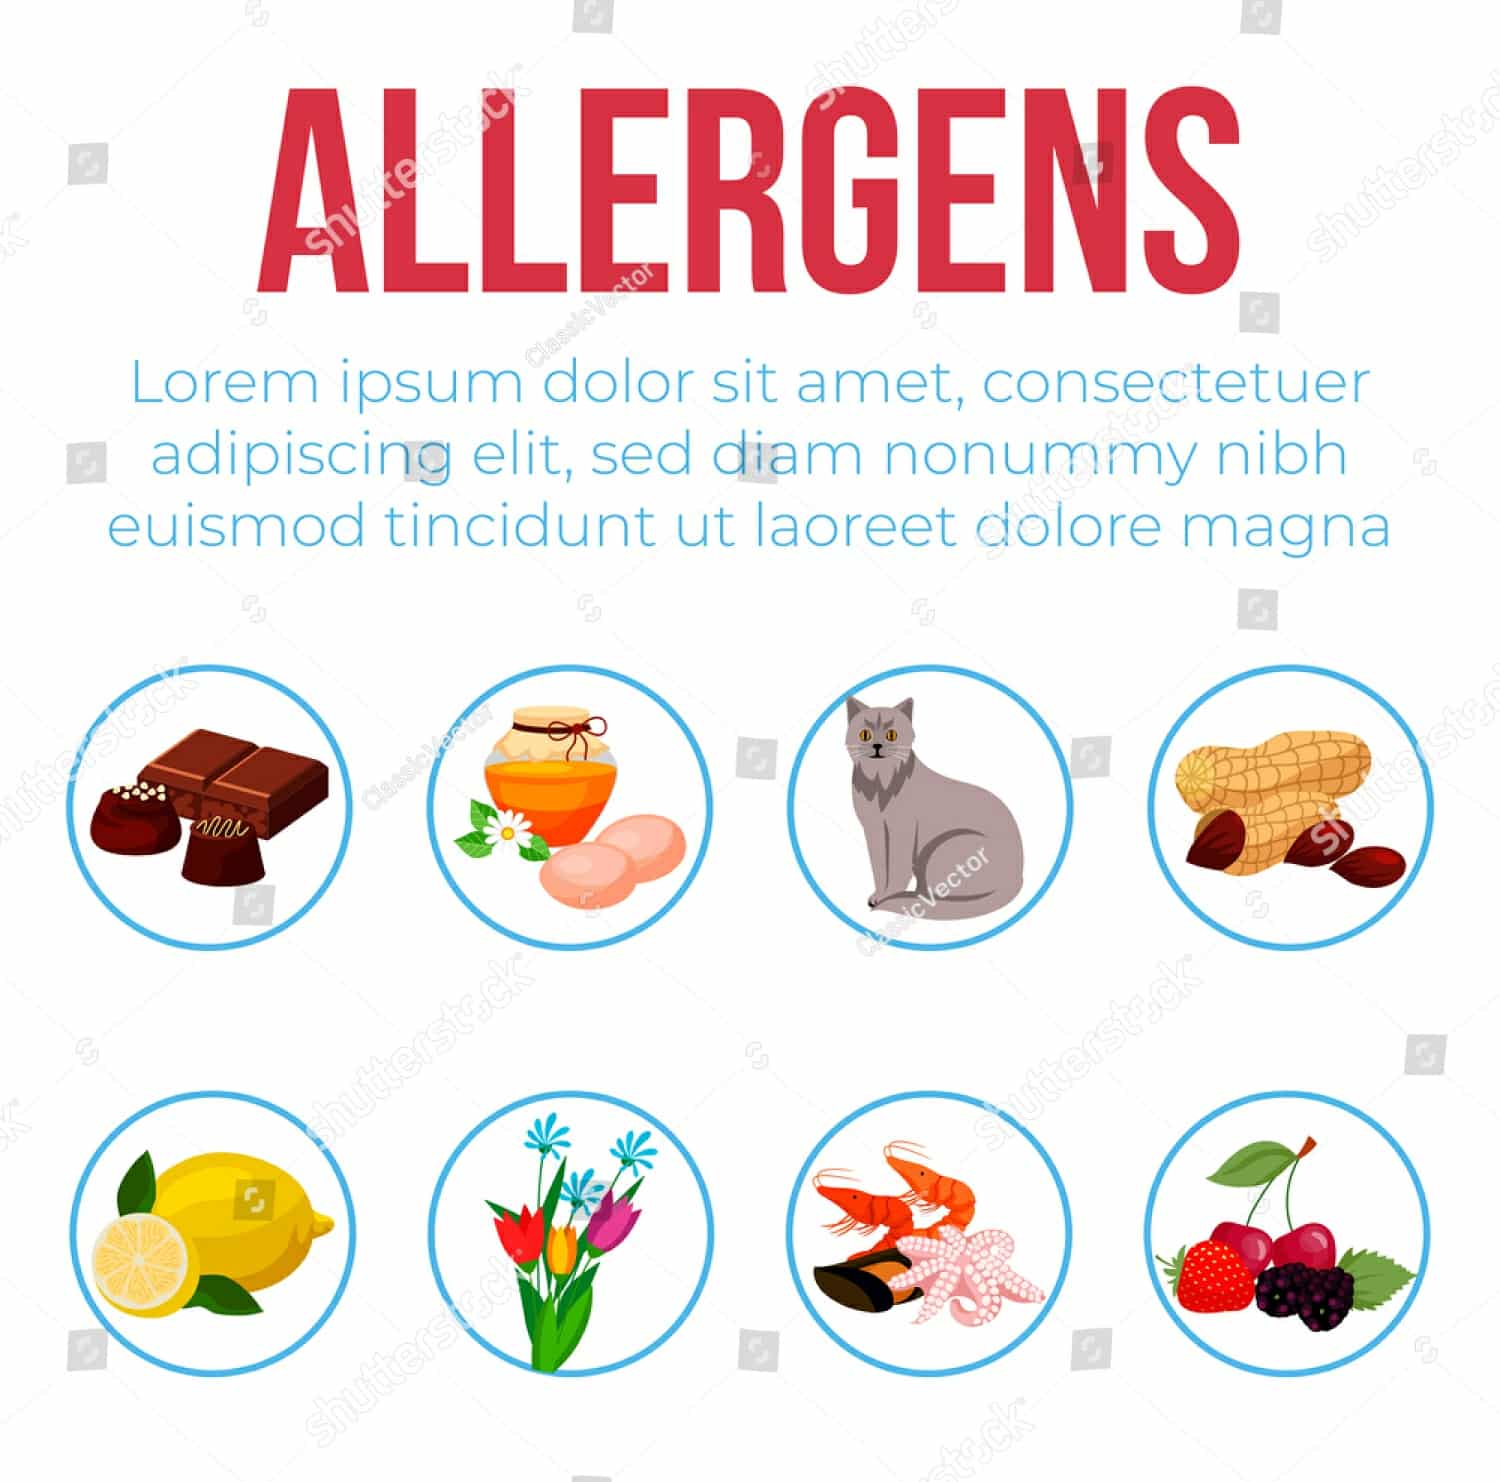 ALLERGIC REACTION: WHAT IS IT, CAUSES, TYPES, SYMPTOMS AND TREATMENT